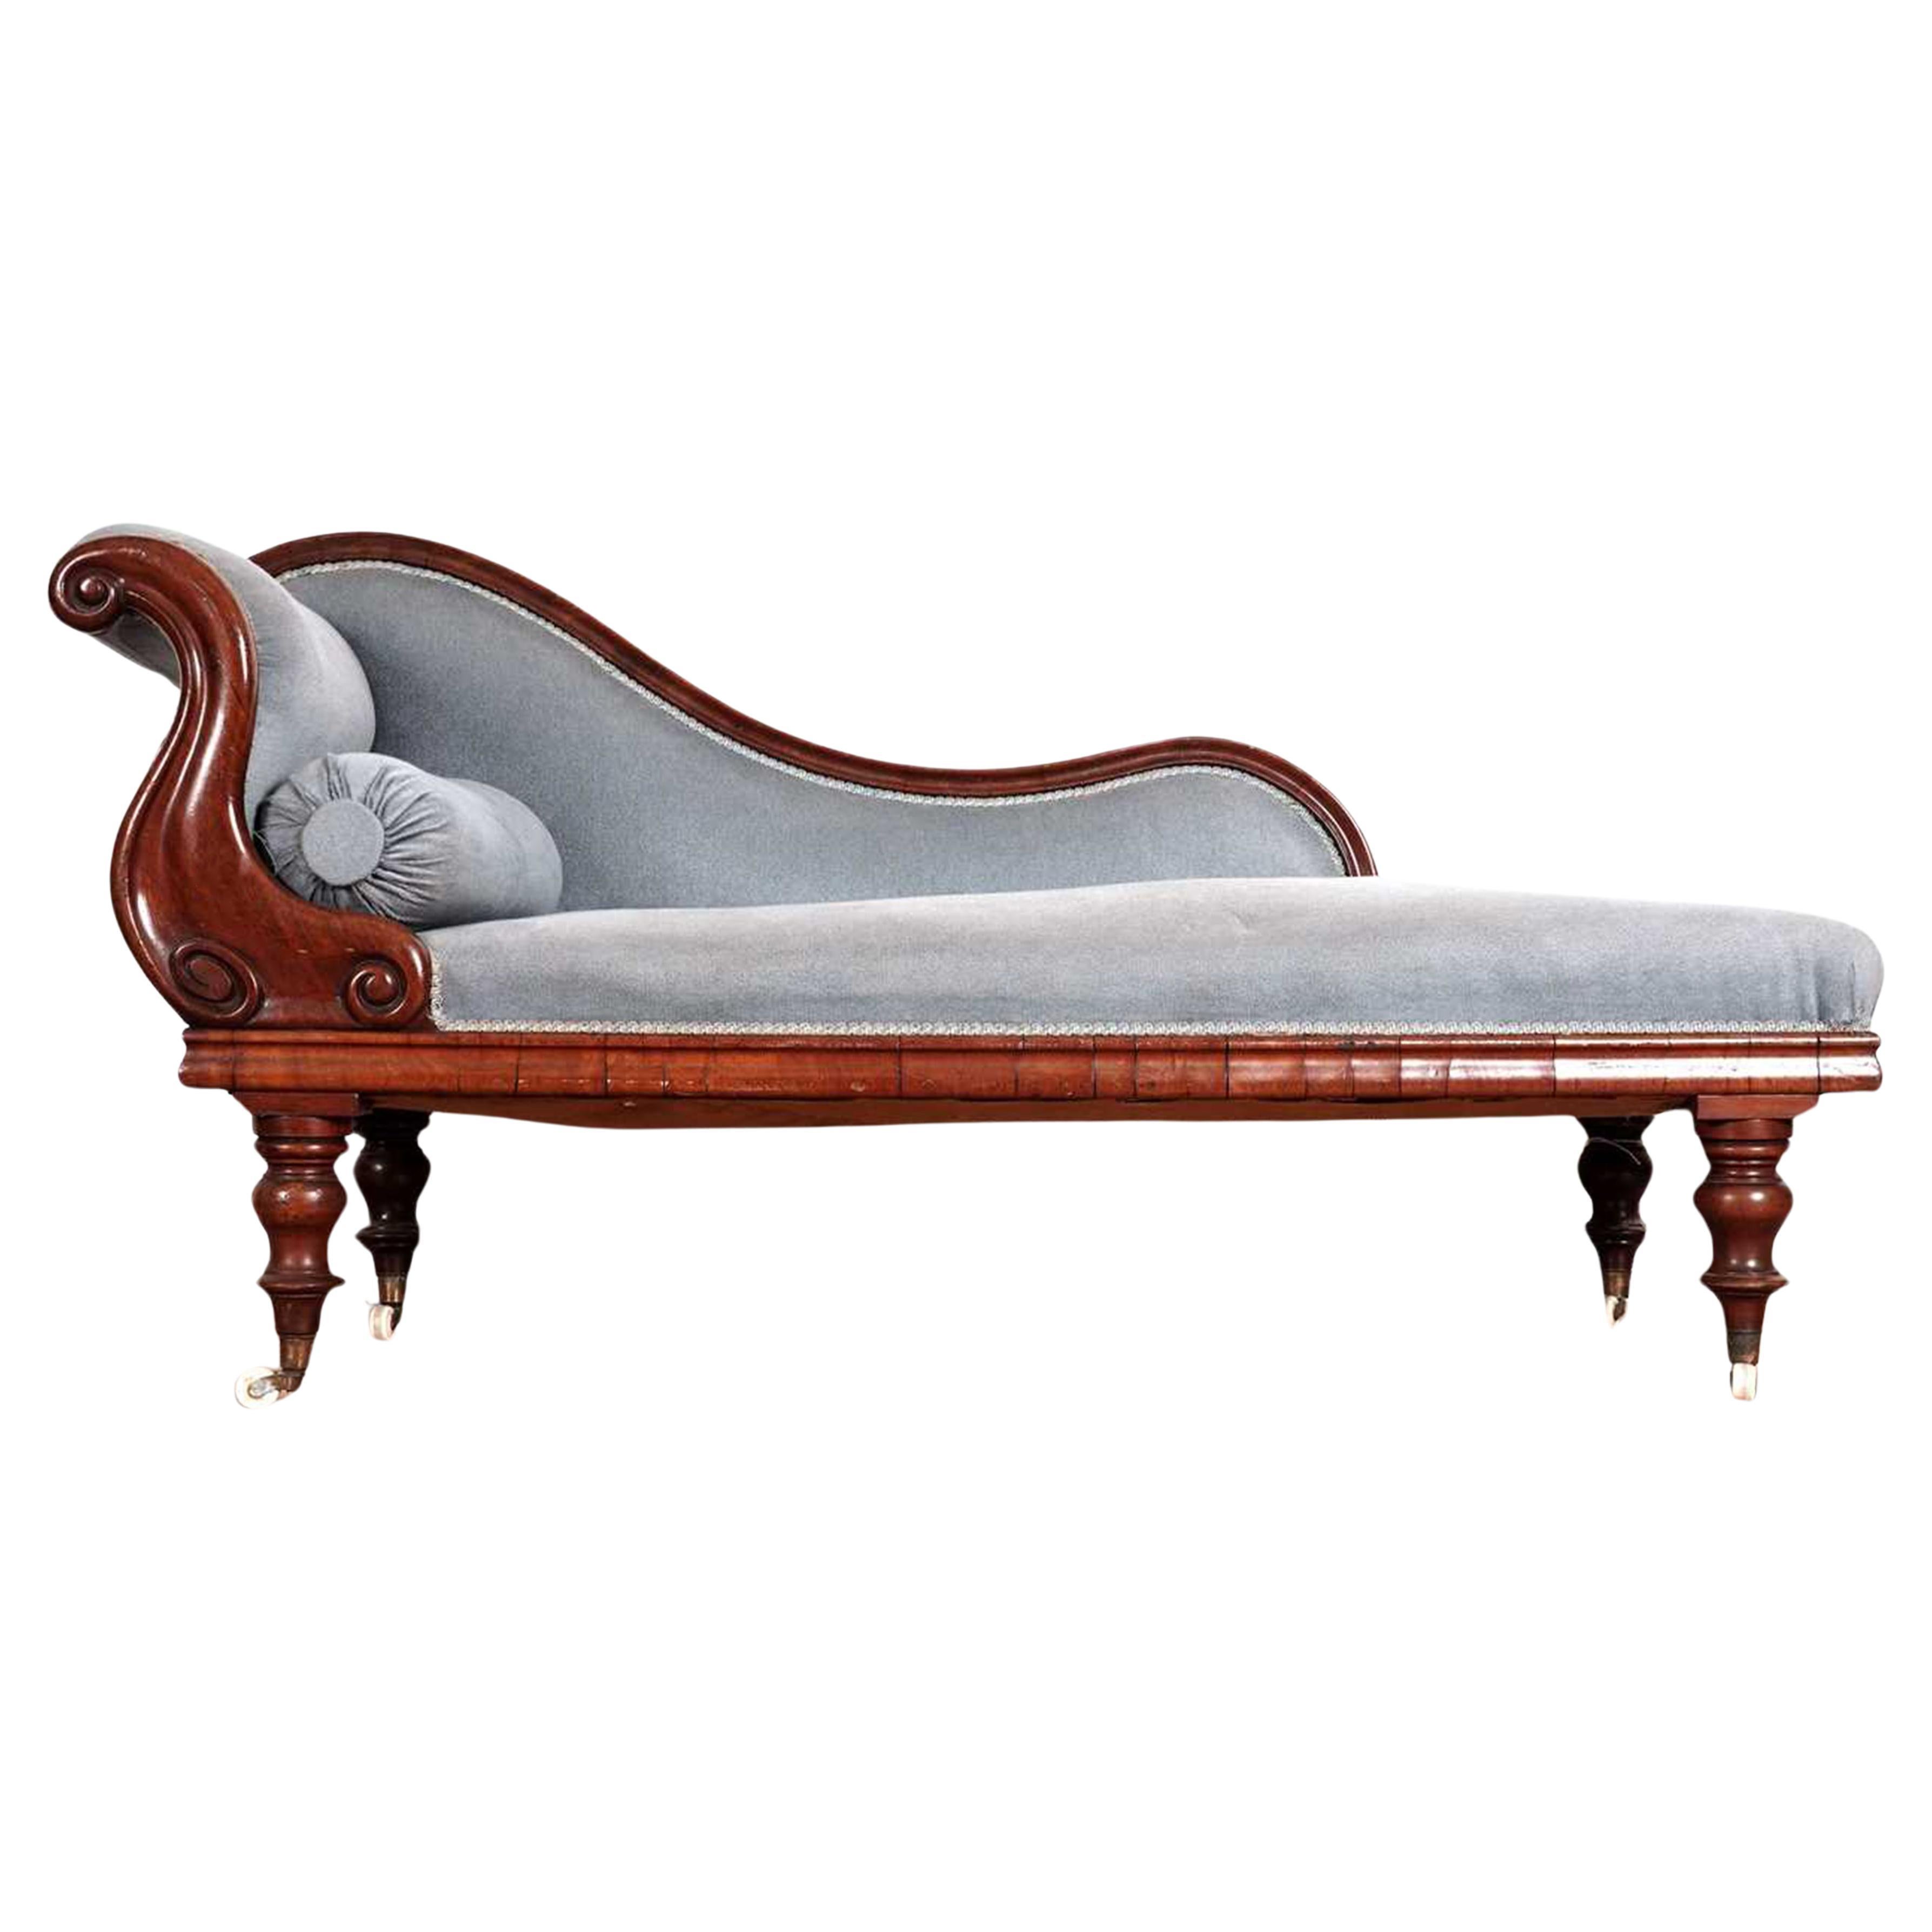 A Victorian Mahogany Swan Back Chaise Longue Upholstered in a Blue Velvet Fabric In Good Condition For Sale In High Wycombe, GB